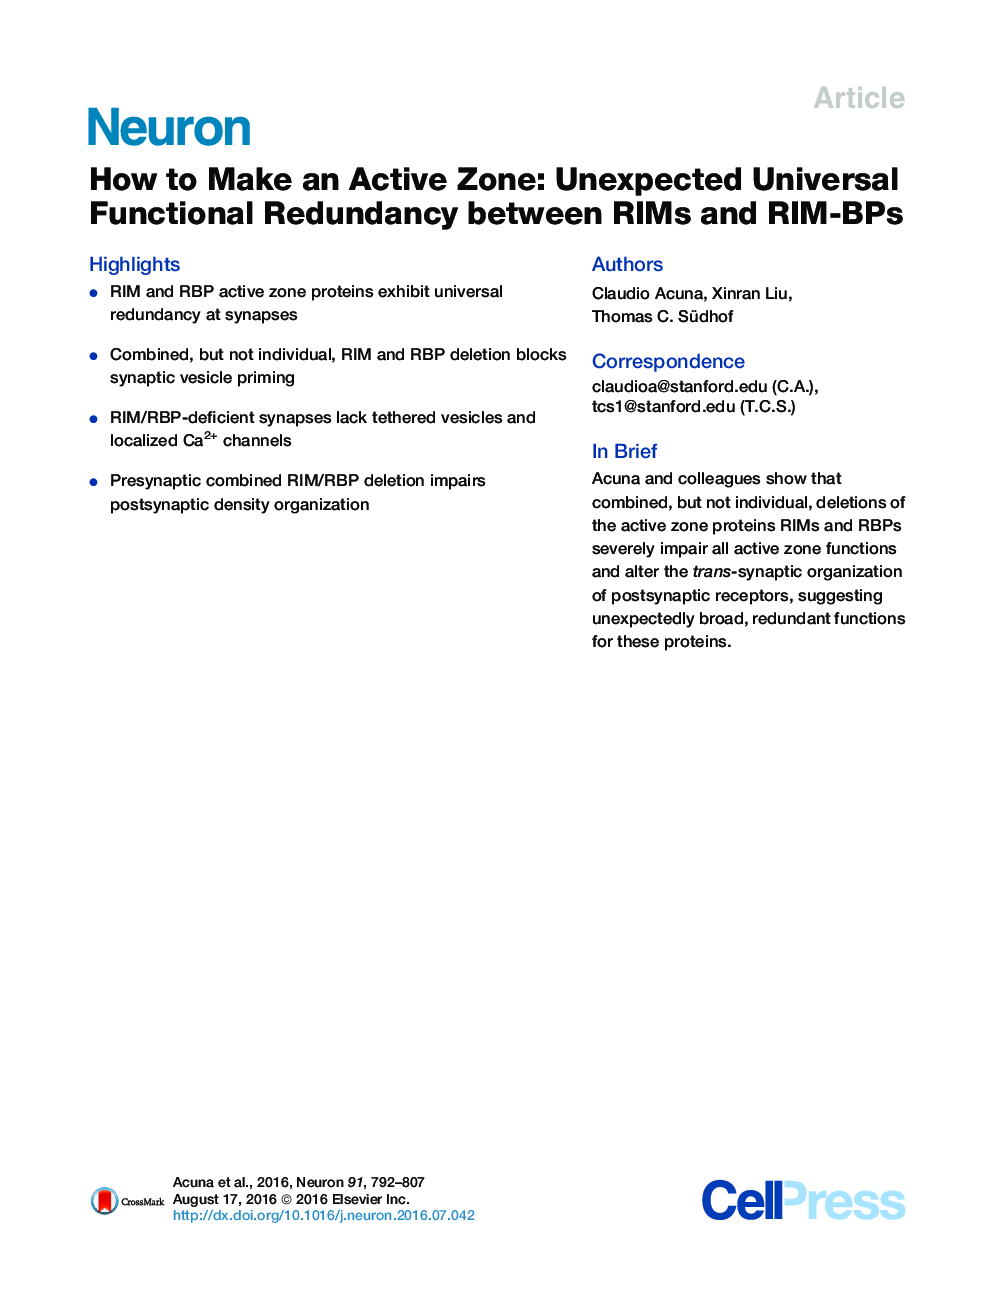 How to Make an Active Zone: Unexpected Universal Functional Redundancy between RIMs and RIM-BPs